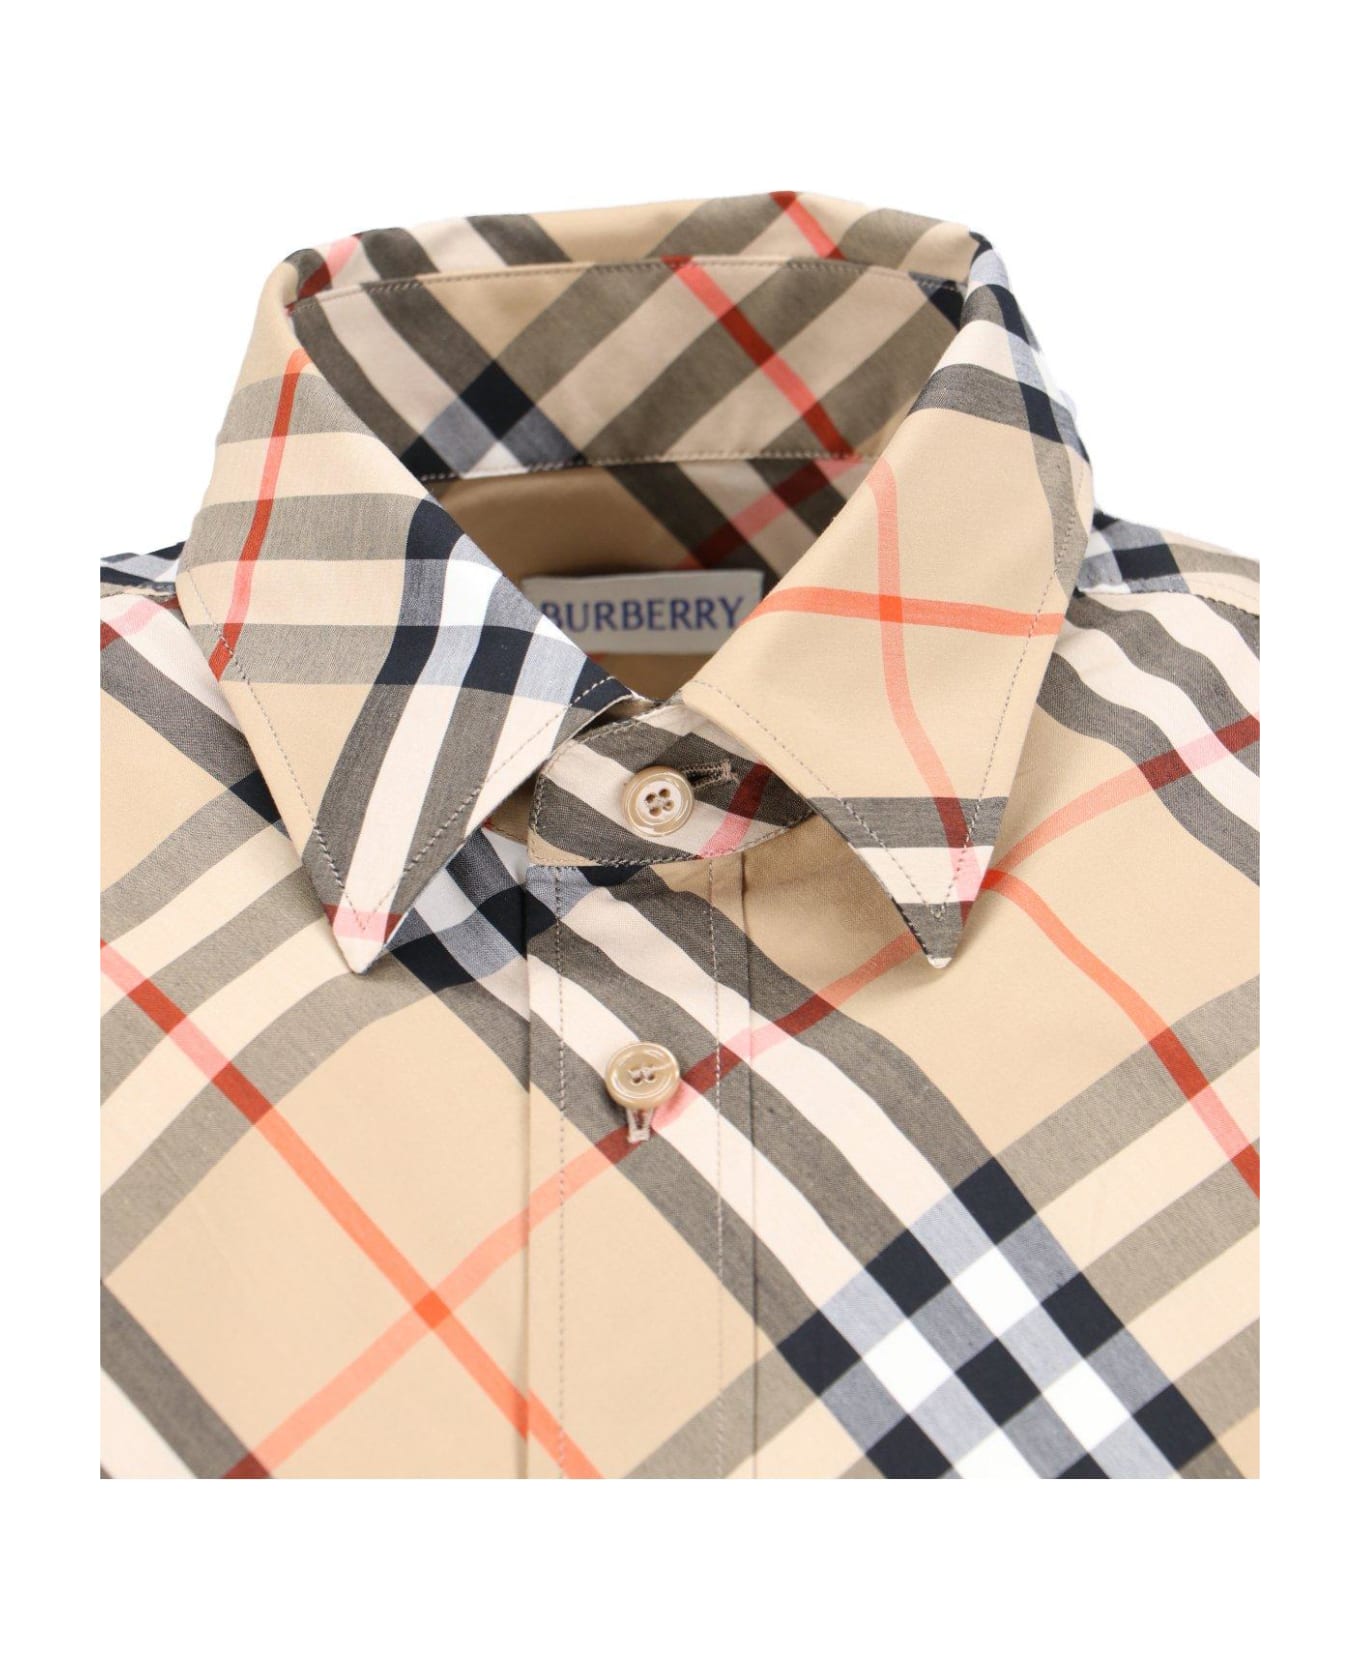 Burberry Short Sleeved Checked Shirt - Sand ip check シャツ